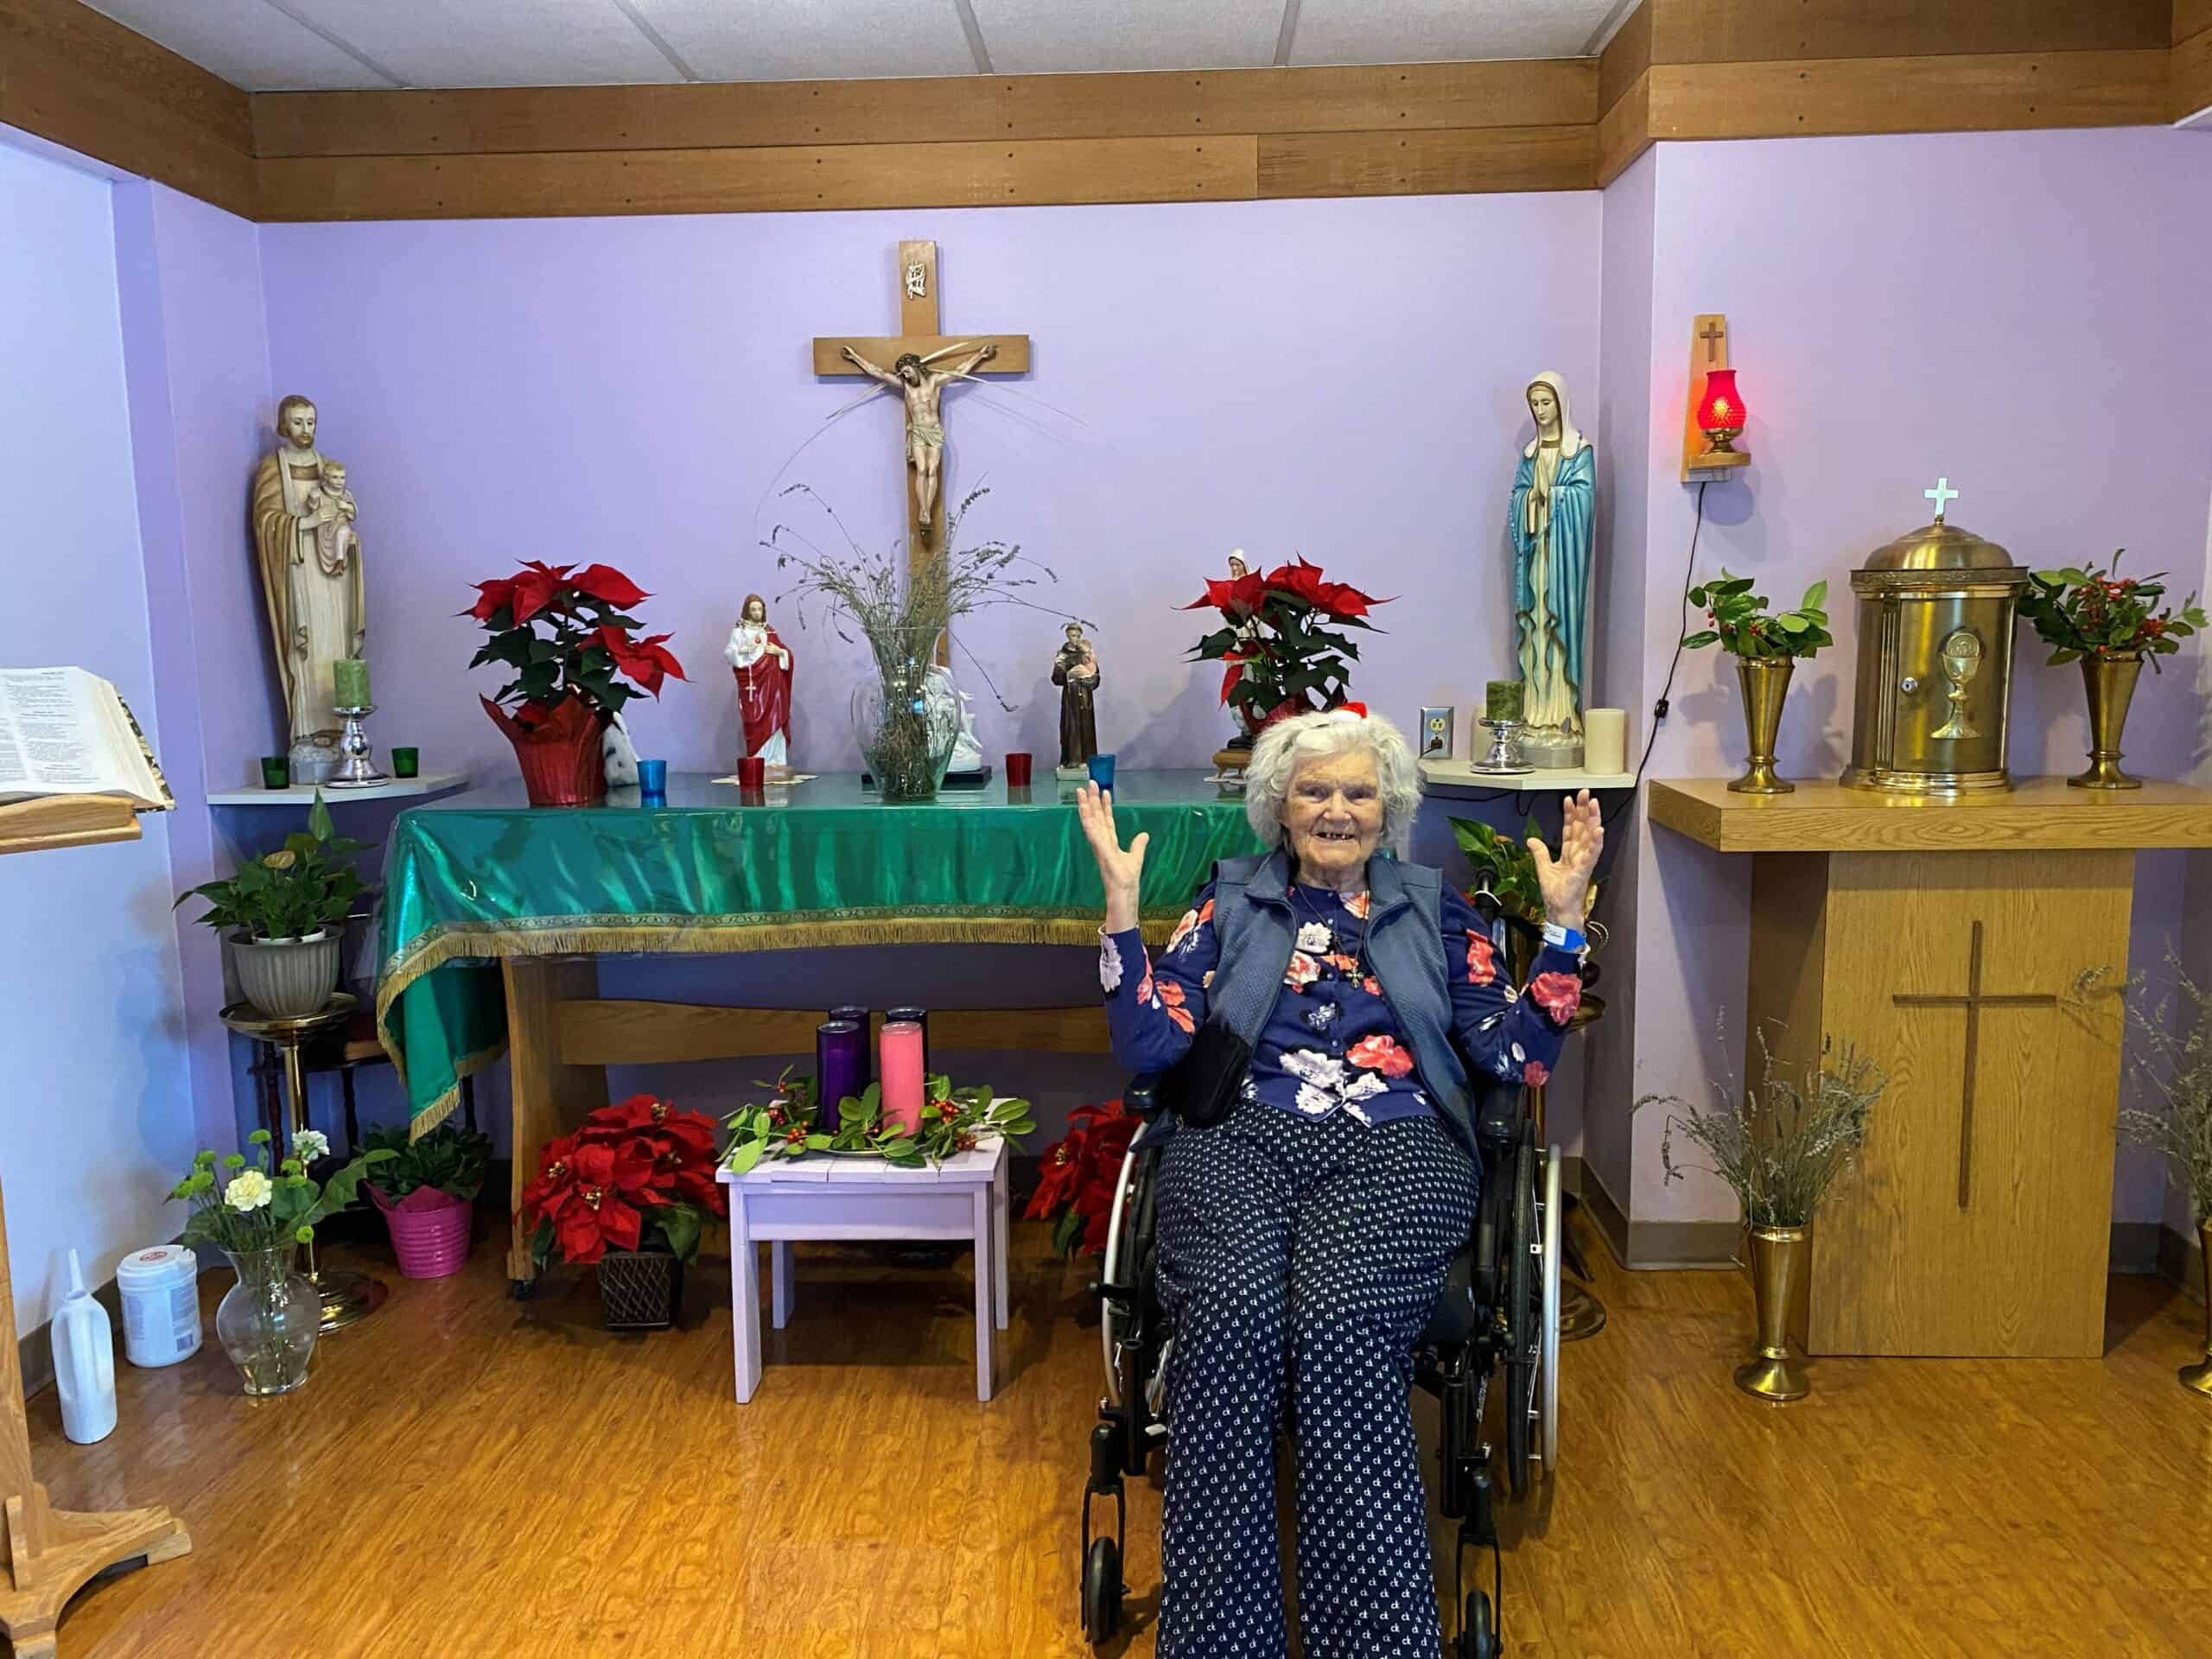 Norma honours her lord at Christmas with poinsettias in the chapel at Holy Family Hospital in Vancouver